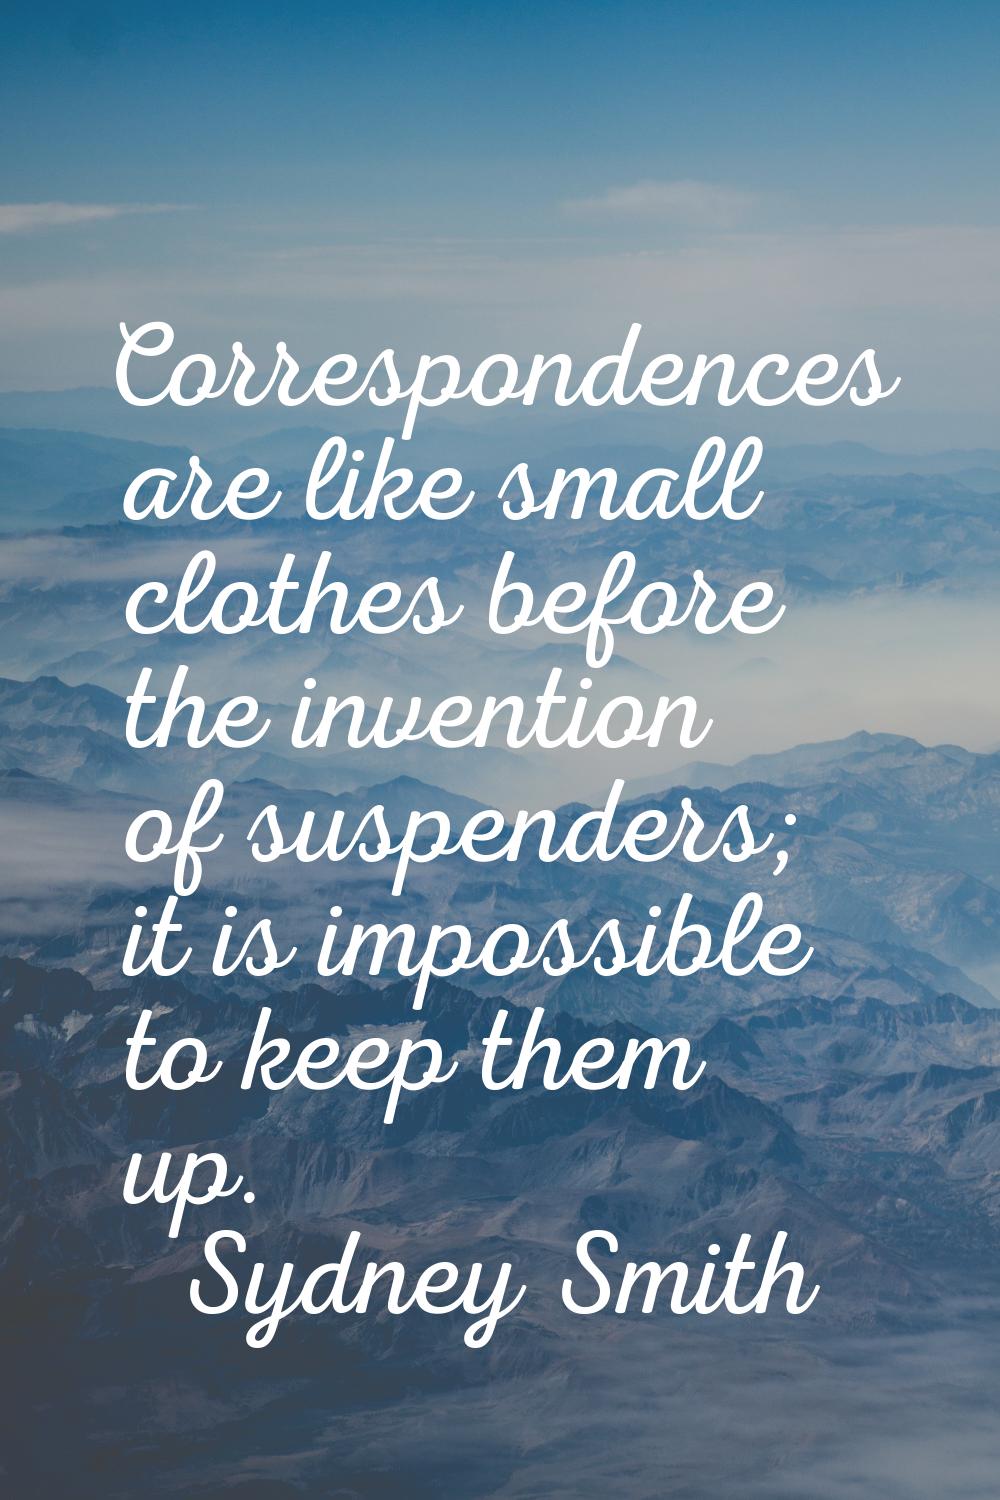 Correspondences are like small clothes before the invention of suspenders; it is impossible to keep